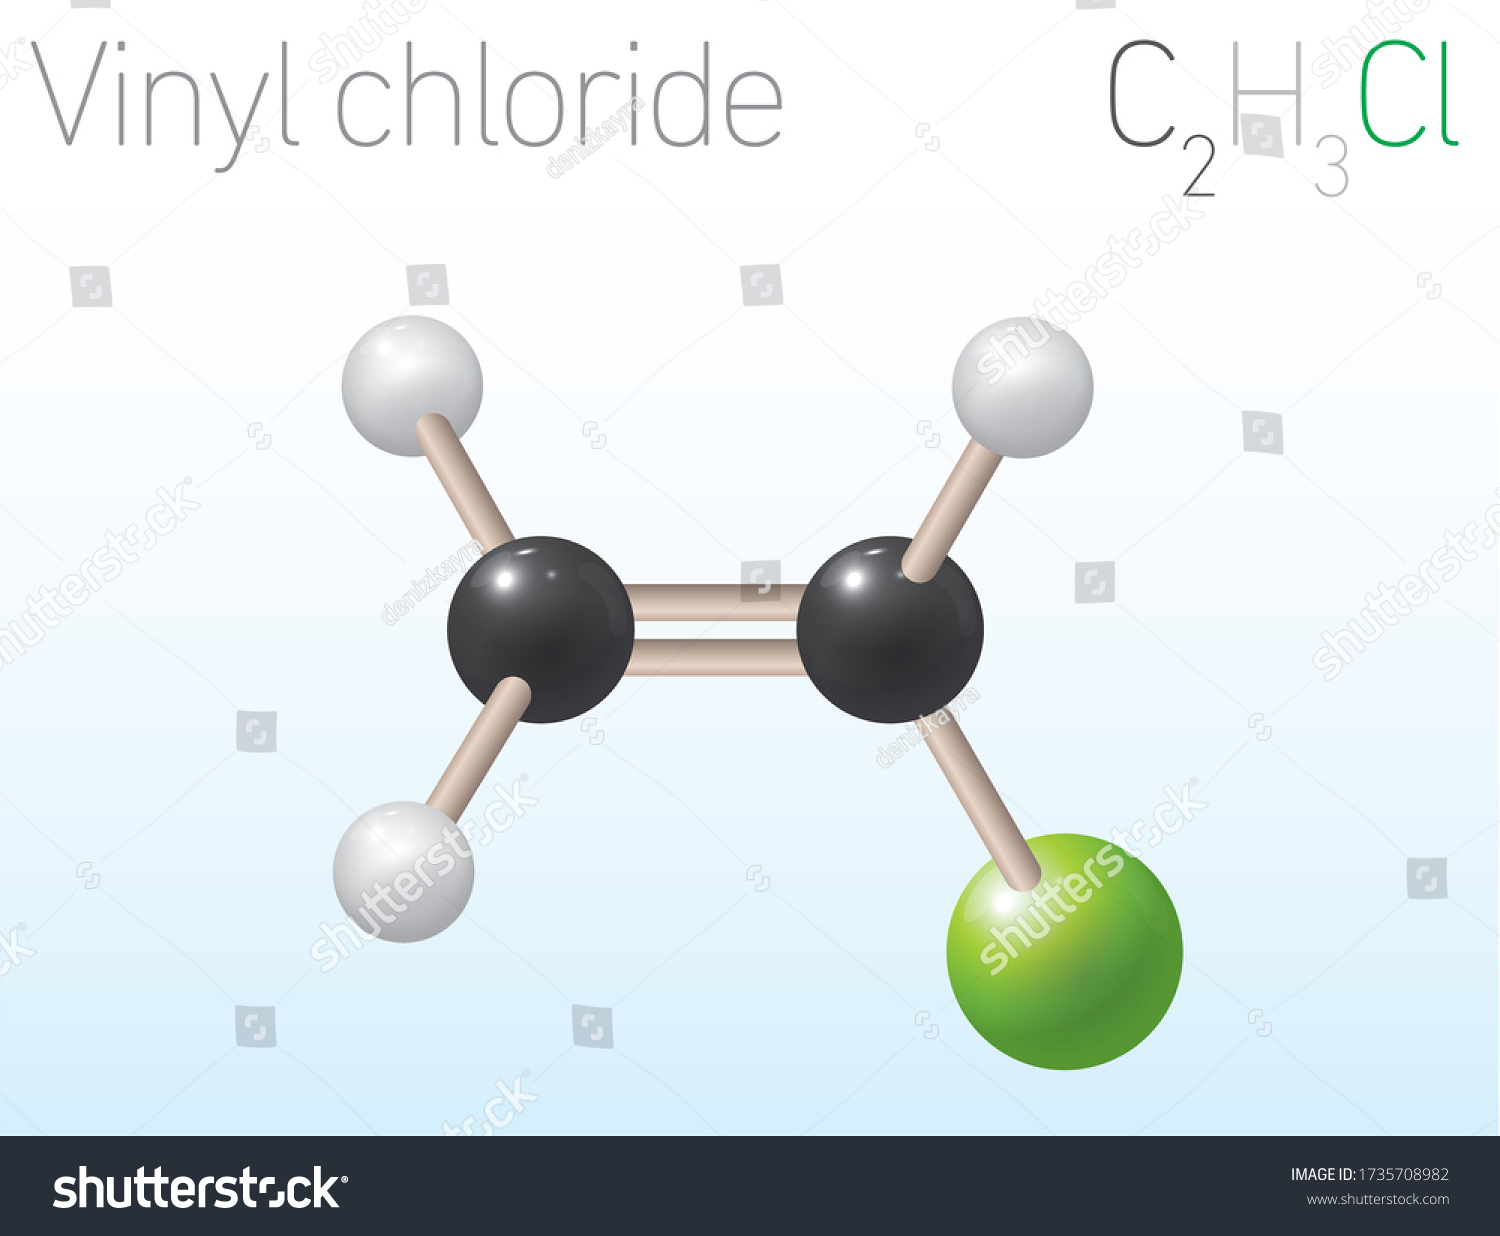 Vinyl Chloride C2h3cl Structural Chemical Formula Stock Vector (Royalty